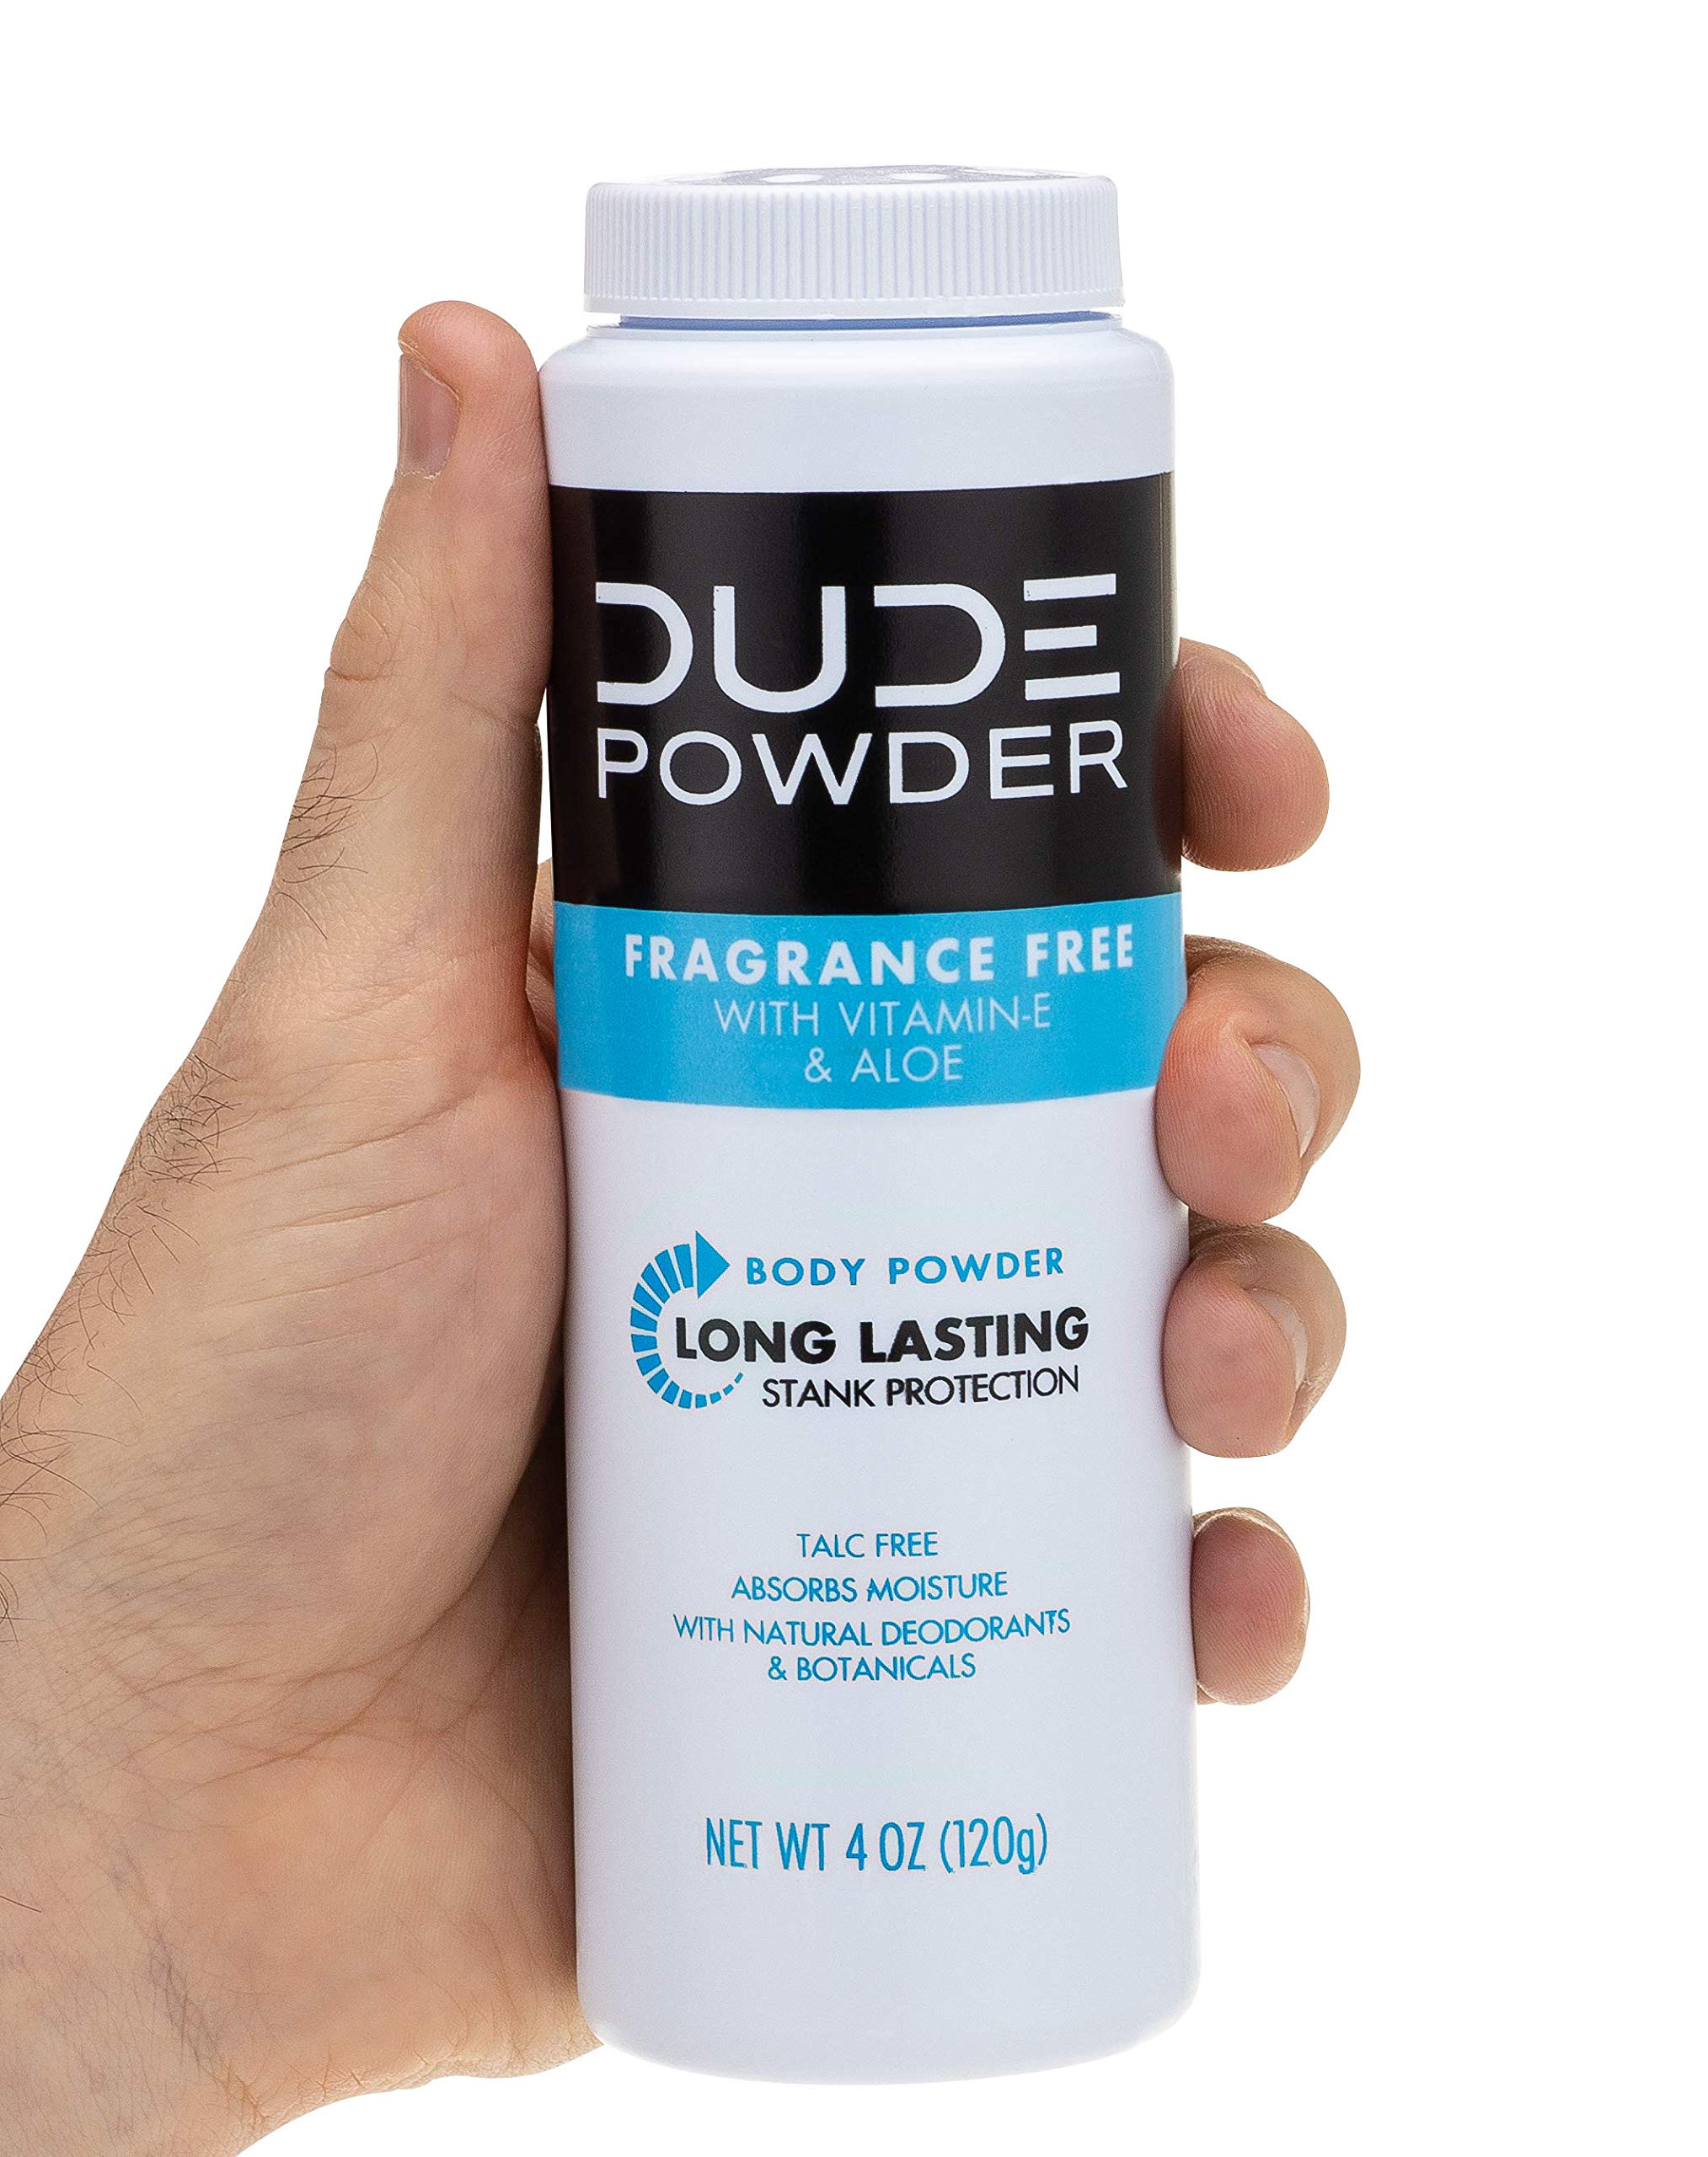 DUDE Body Powder - Fragrance Free 4 Ounce (3 Bottle Pack) Natural Deodorizers With Chamomile & Aloe, Talc Free Formula, Corn-Starch Based Daily Post-Shower Deodorizing Powder for Men